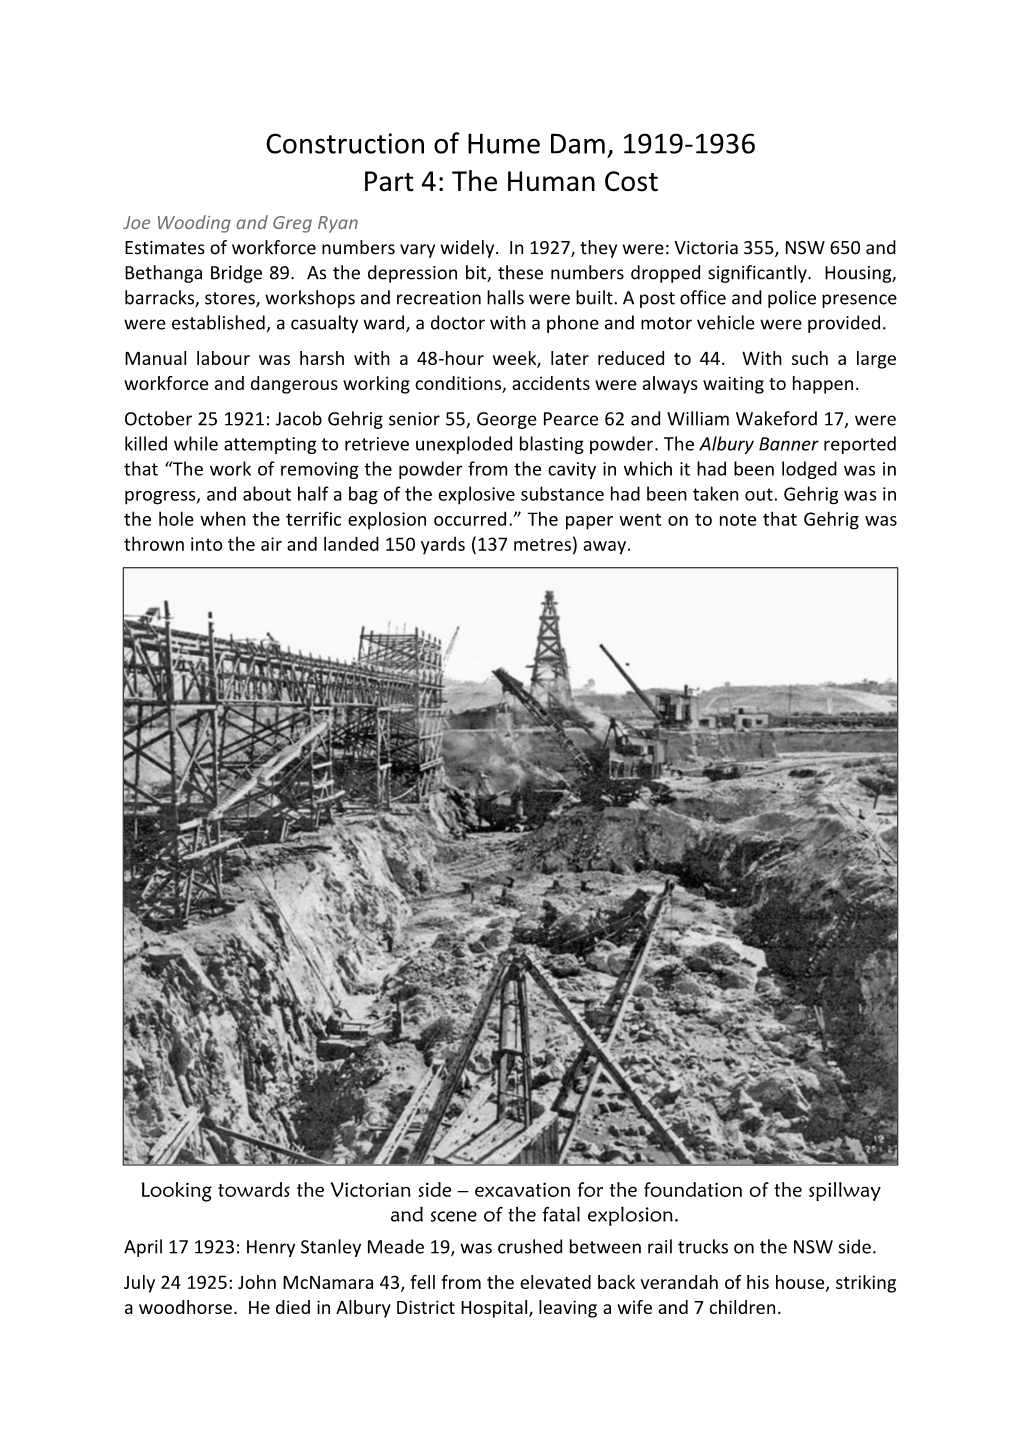 Construction of Hume Dam, 1919-1936 Part 4: the Human Cost Joe Wooding and Greg Ryan Estimates of Workforce Numbers Vary Widely